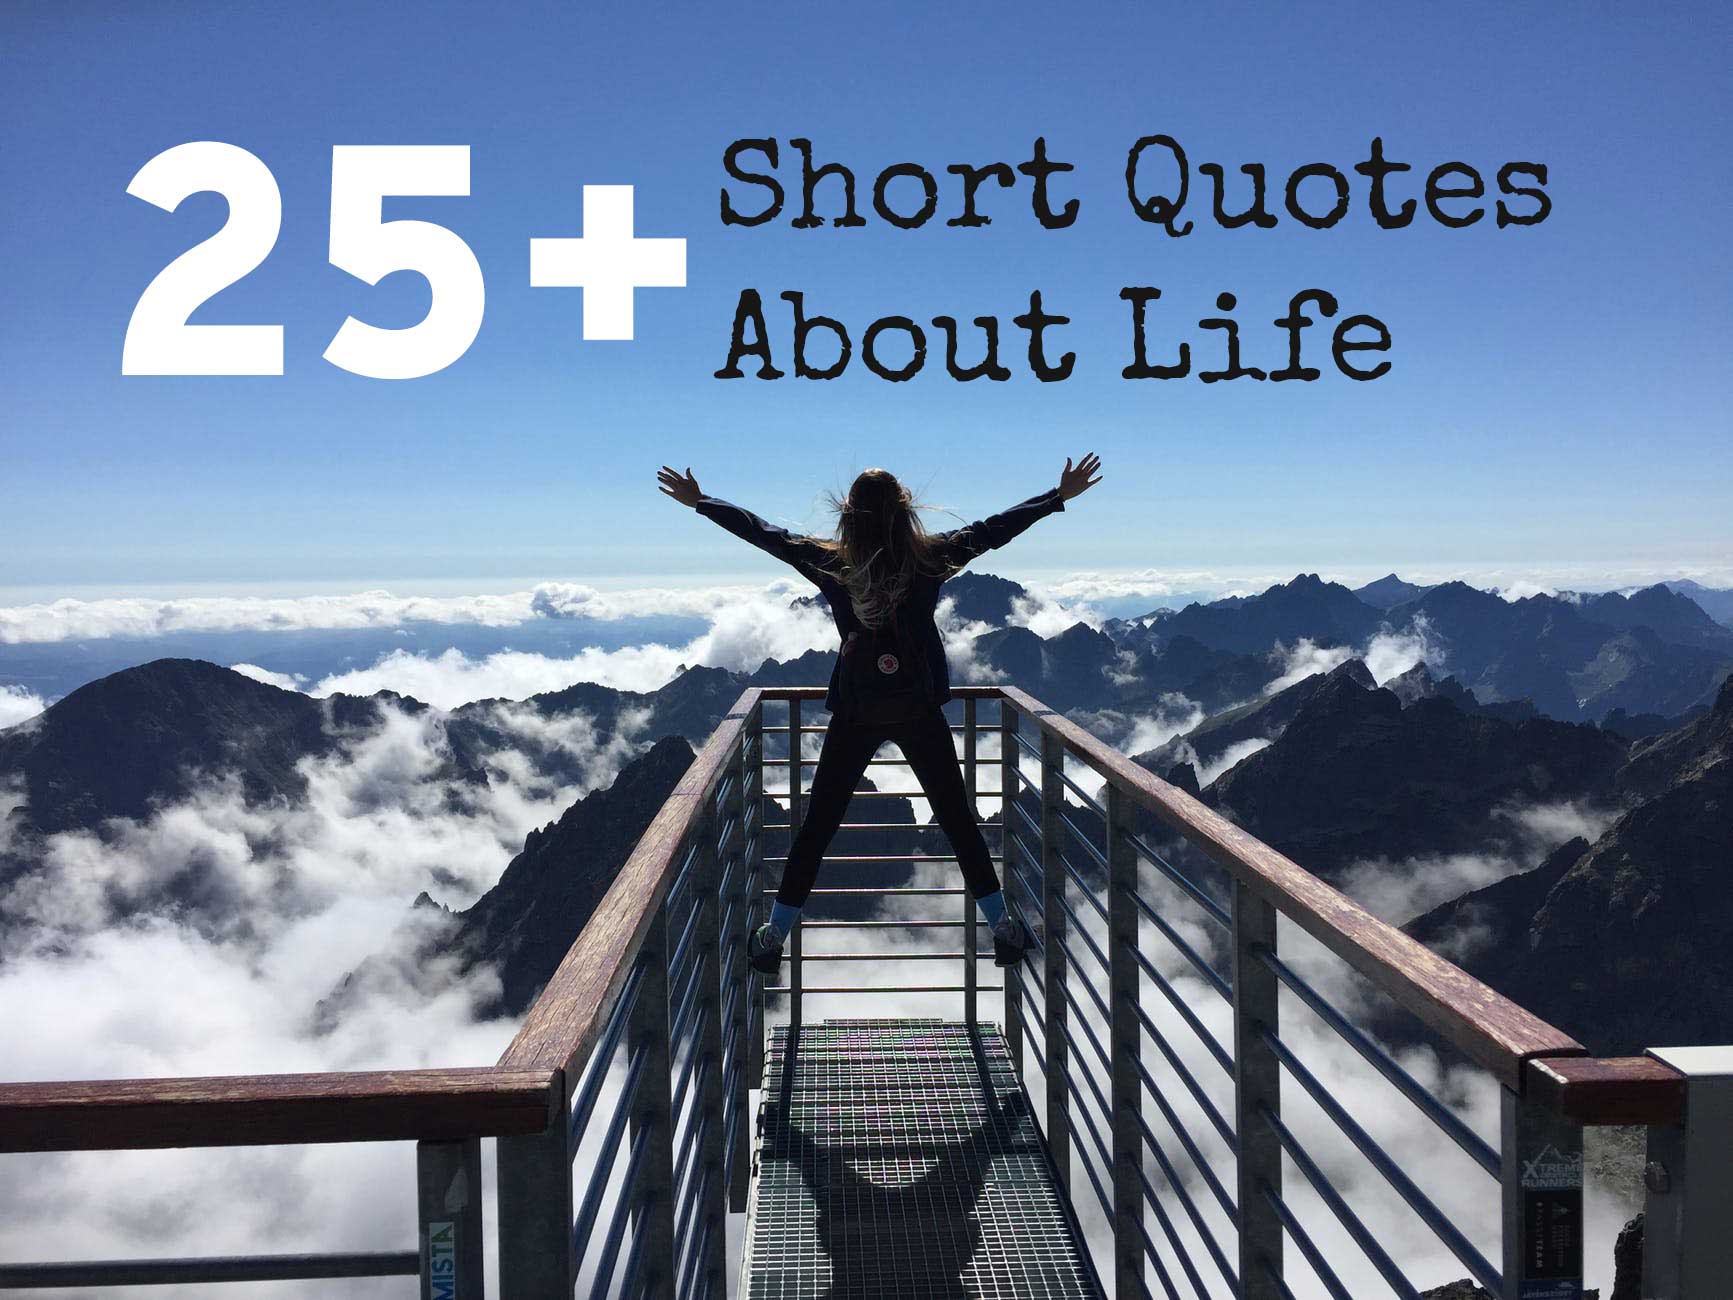 25+-short-quotes-and-sayings-about-life